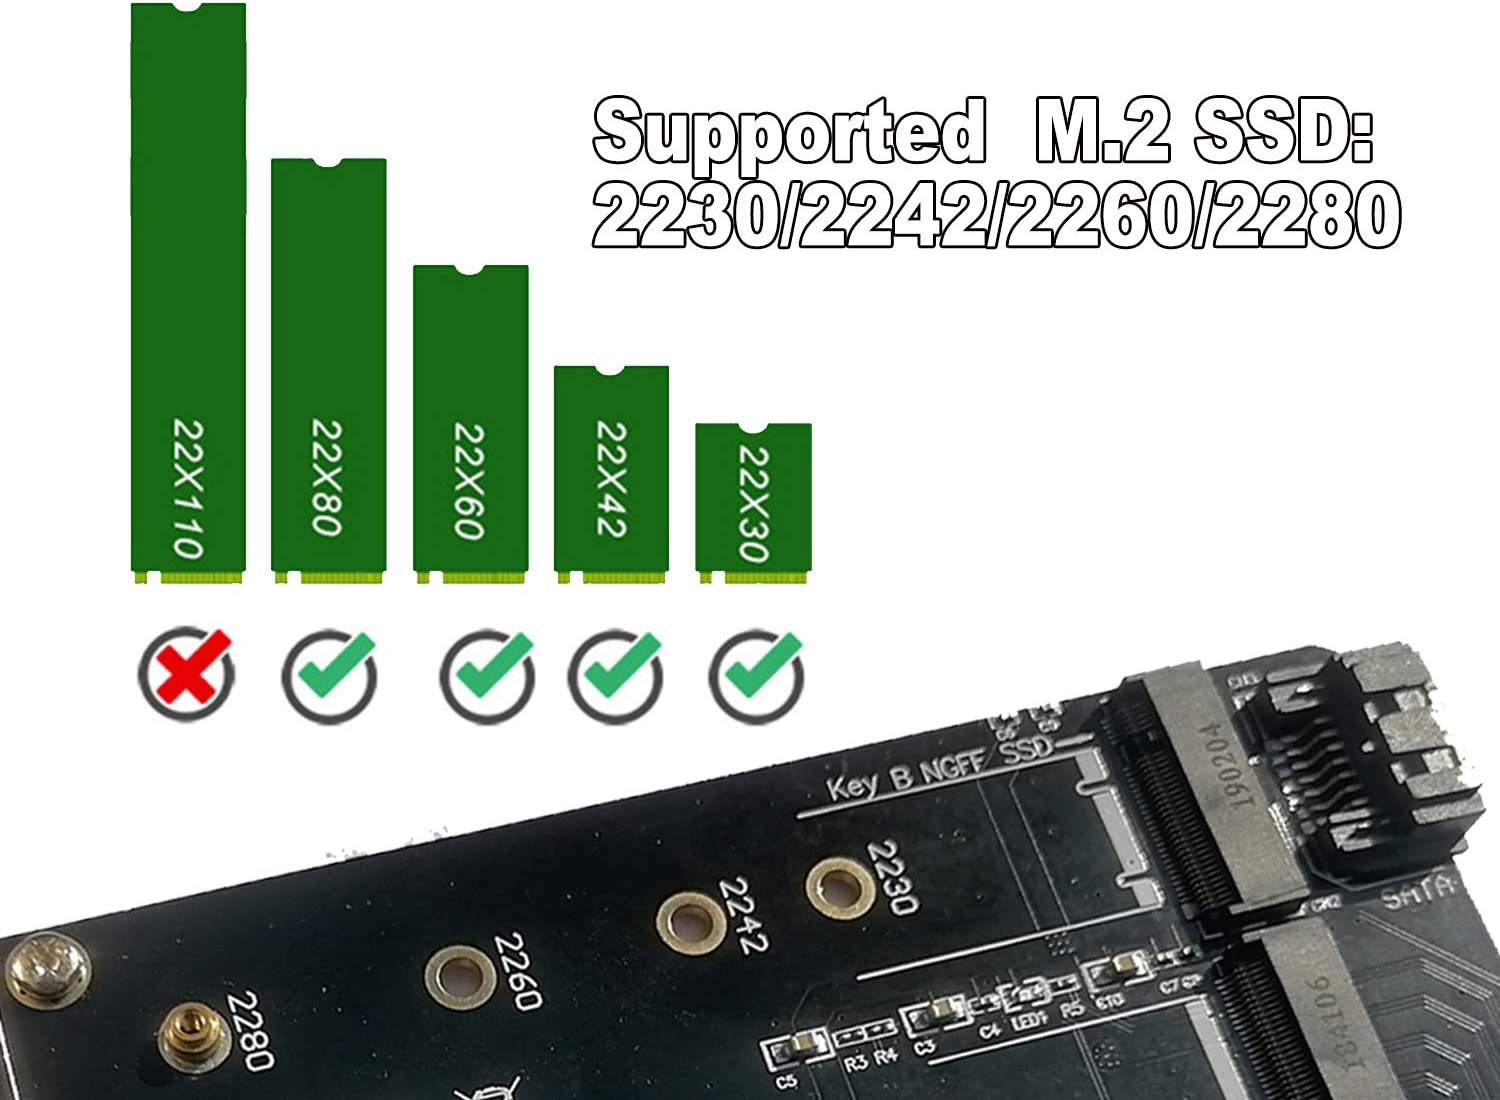 Dual M.2 PCIE Adapter for SATA or PCIE NVMe SSD with Advanced Heat Sink  Solution,M.2 SSD NVME (m Key) and SATA (b Key) 22110 2280 2260 2242 2230 to